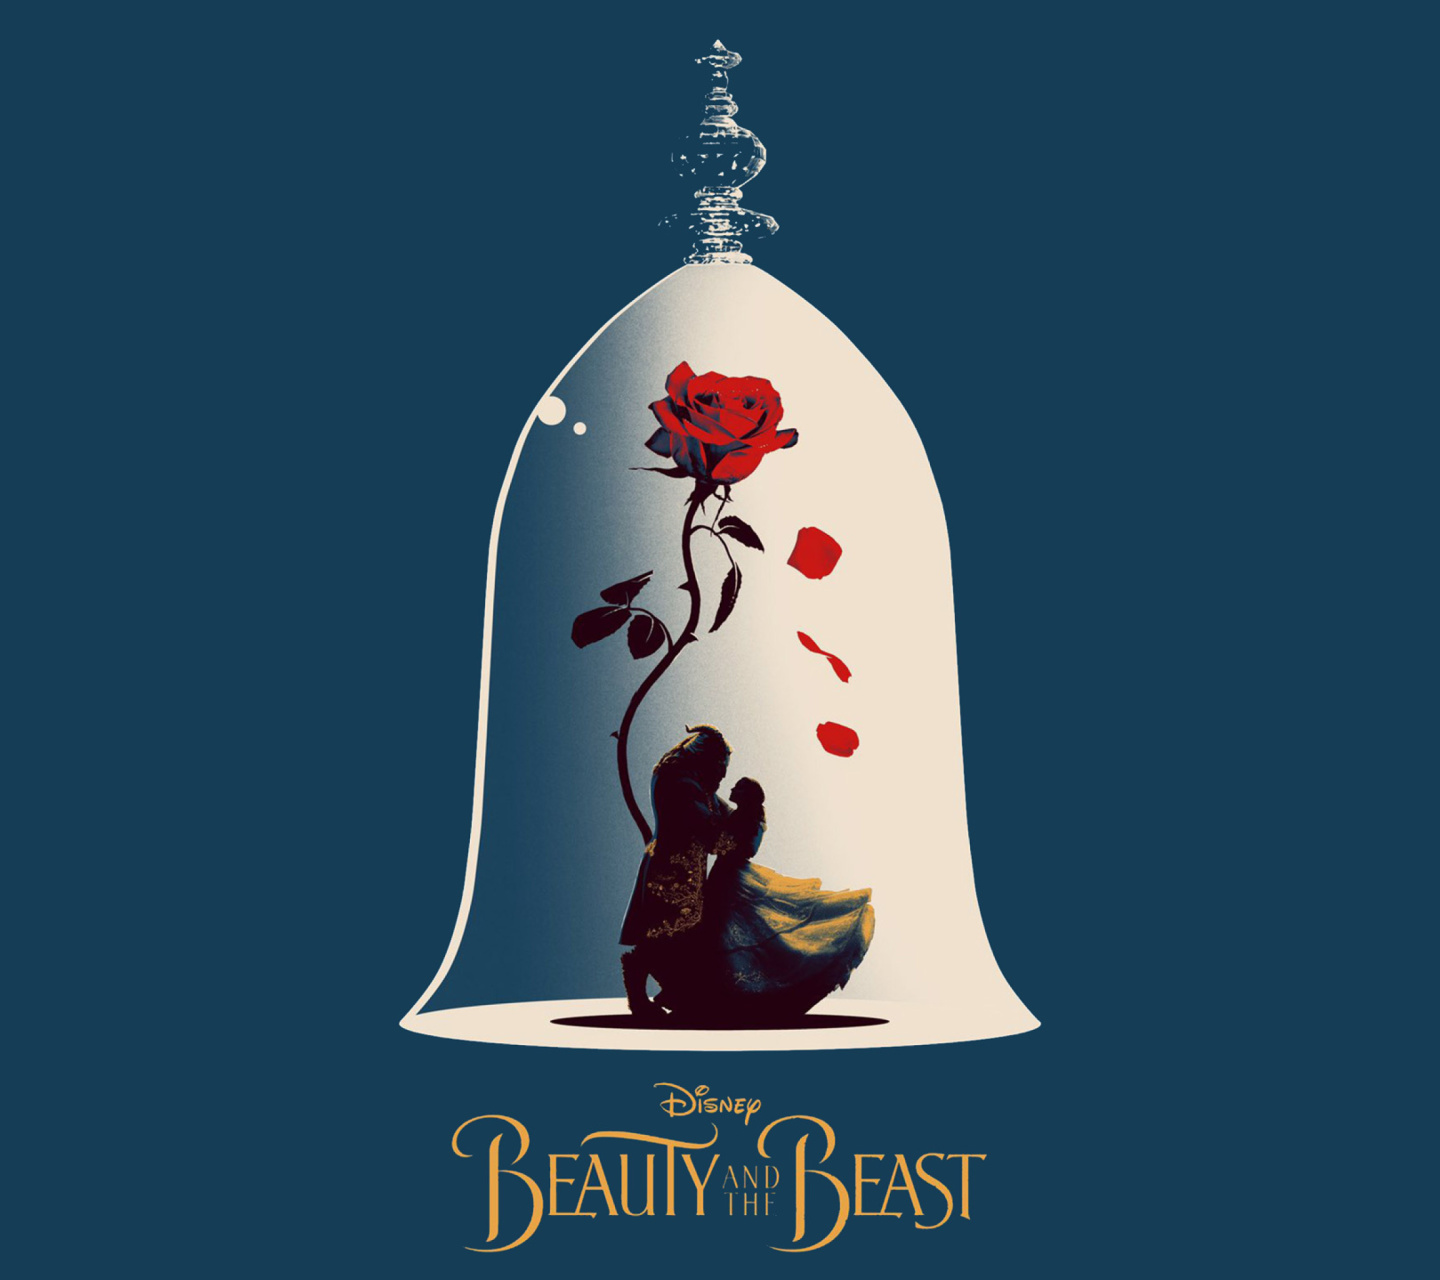 Beauty and the Beast Poster wallpaper 1440x1280